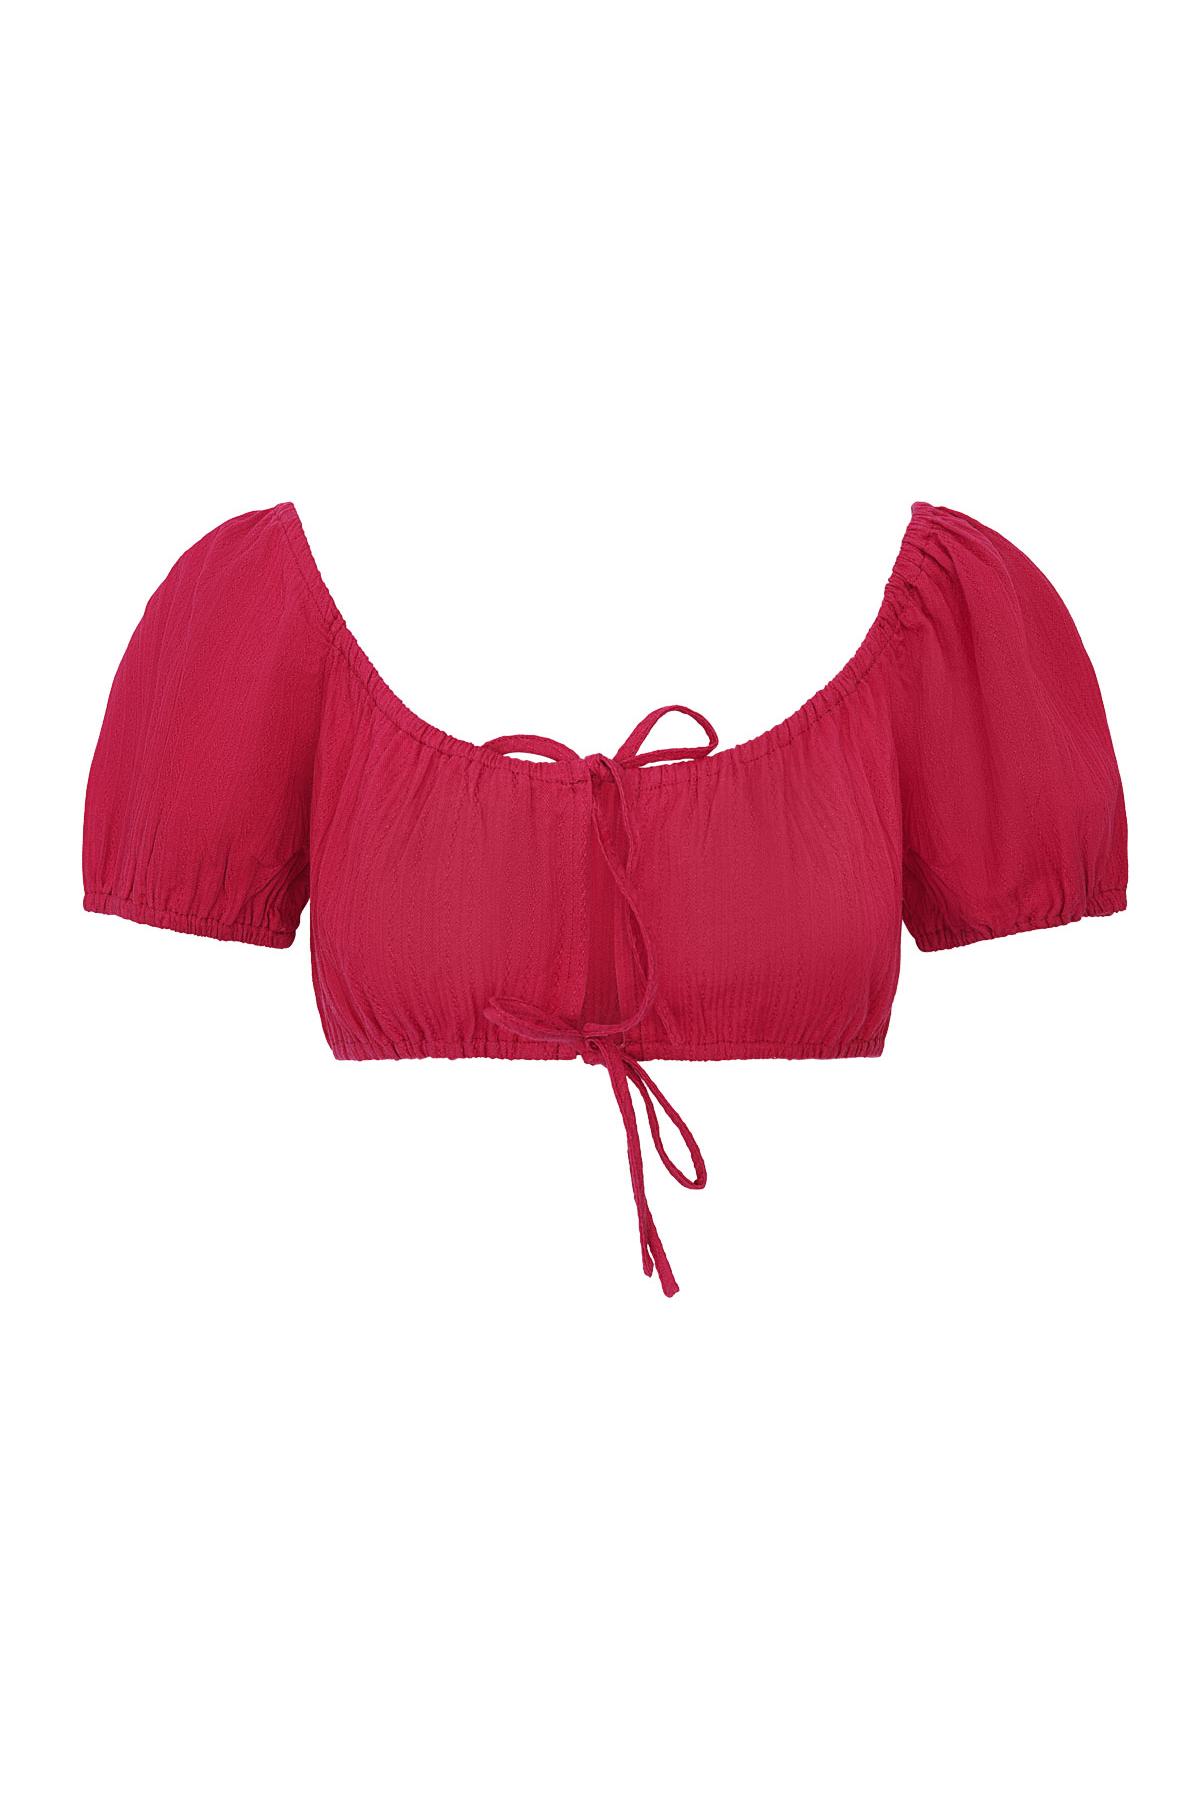 Crop top knotted Red M 